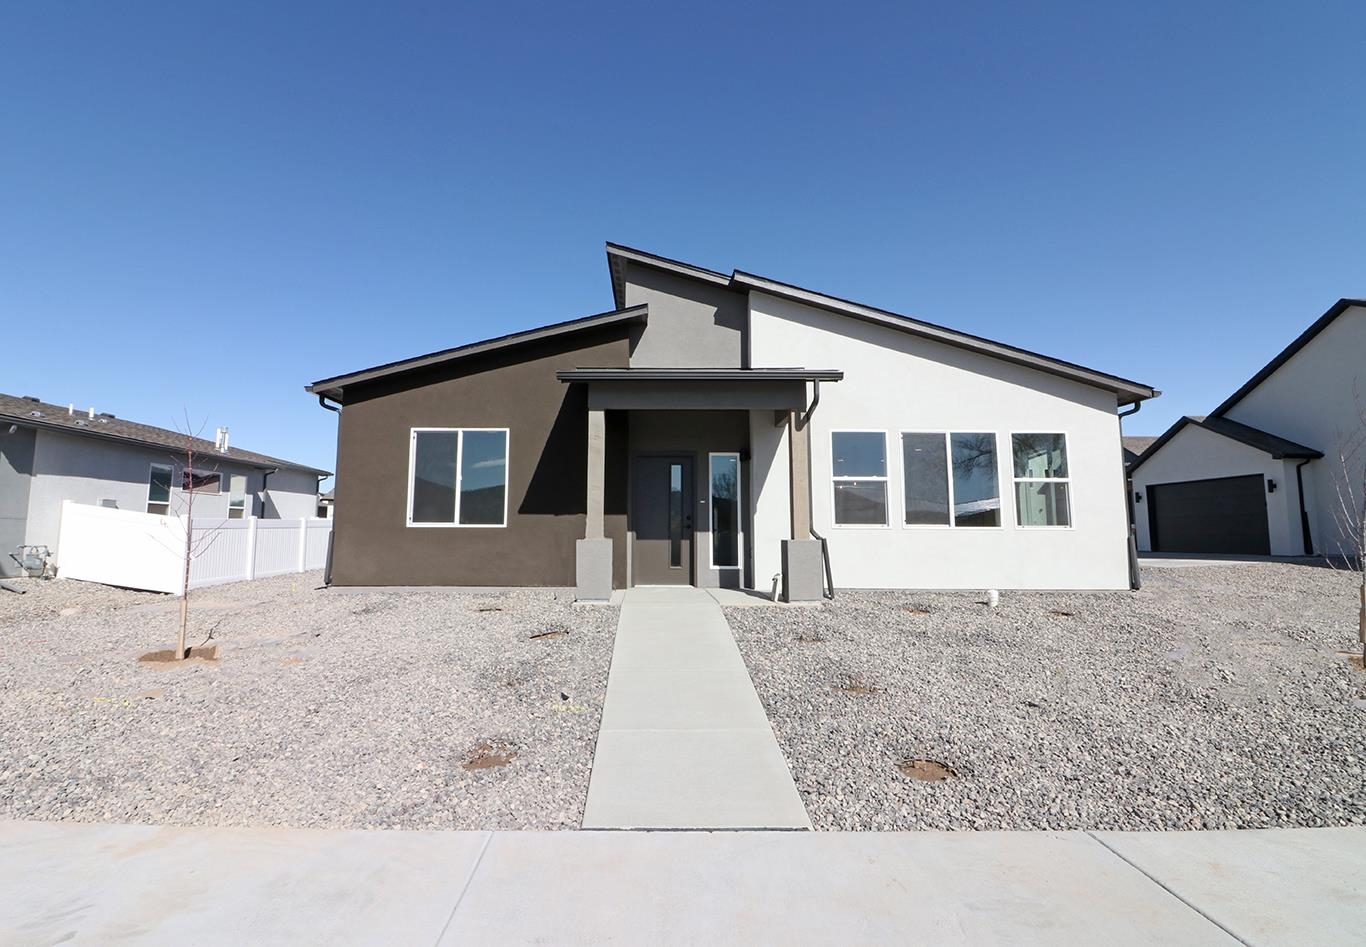 Welcome to Iron Wheel subdivision where affordability meets function! TWO UNIQUE AND CREATIVE PREFERRED LENDER OPTIONS THAT MAY SAVE YOU UP TO SEVERAL HUNDRED DOLLARS ON YOUR PAYMENT - NO GIMMICKS - CALL FOR DETAILS!   This one-of-a-kind community will have a wide variety of home types and sizes, a walking path to FMHS, neighborhood park & easy access to both Grand Junction & Fruita. Pricing includes xeriscaping & fencing. These well-planned homes offer maximum functional use of space, durable yet beautiful finishes & cute outdoor living spaces that require minimal maintenance. New Vertical floor plan with 3 bedrooms 2 baths & 2 Car garage. NO FINISH CHOICE OPTIONS AVAILABLE.  Estimated completion 12/18/2023